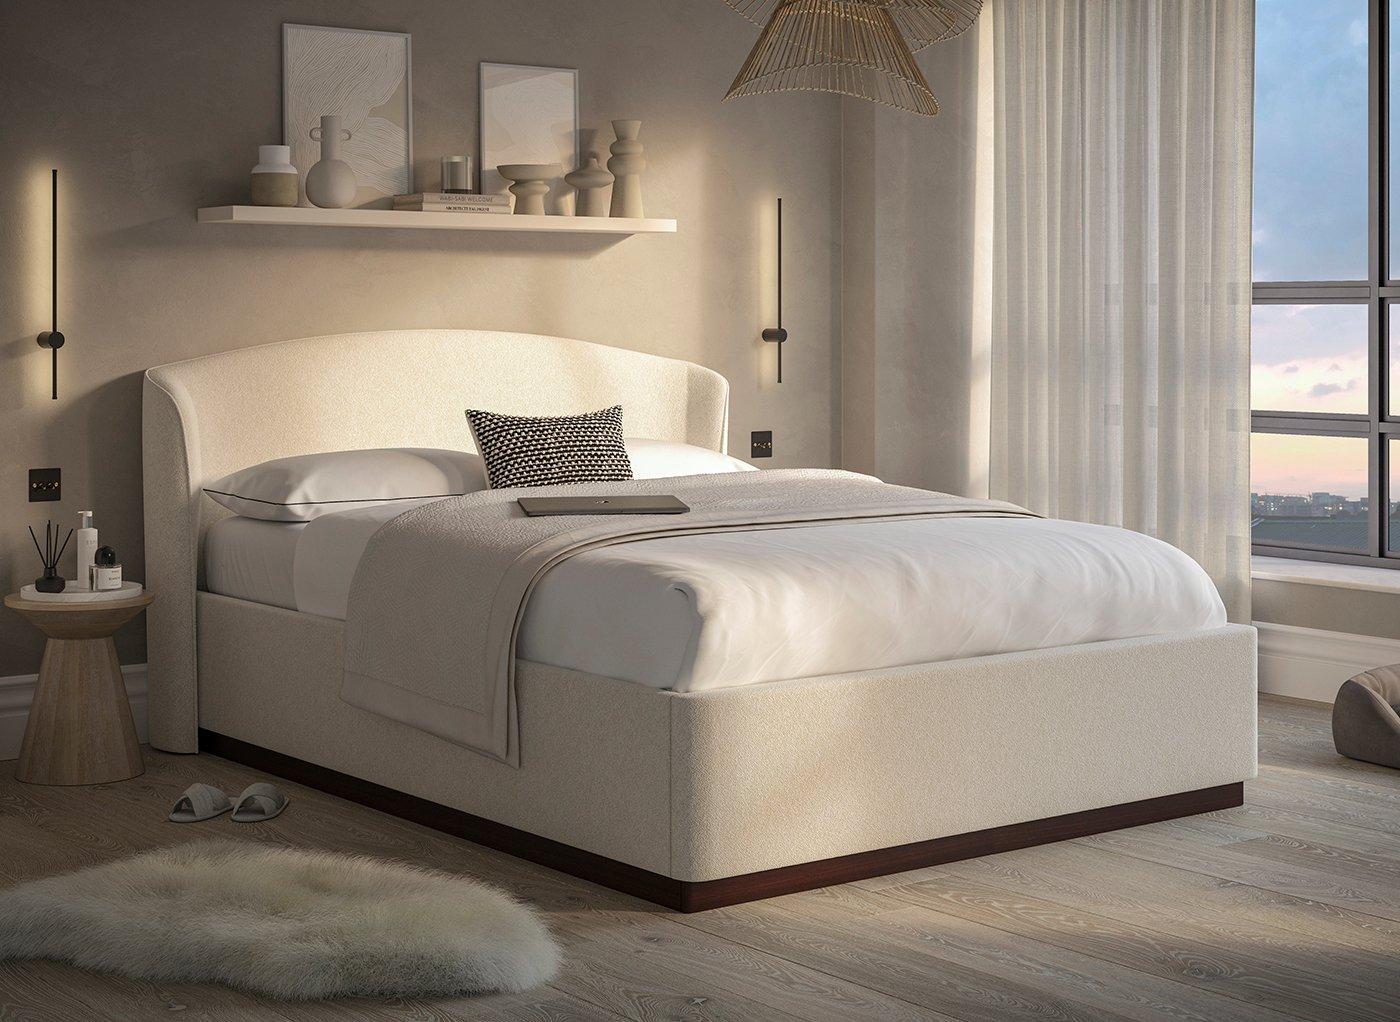 House Beautiful Chloe Upholstered Ottoman Bed Frame